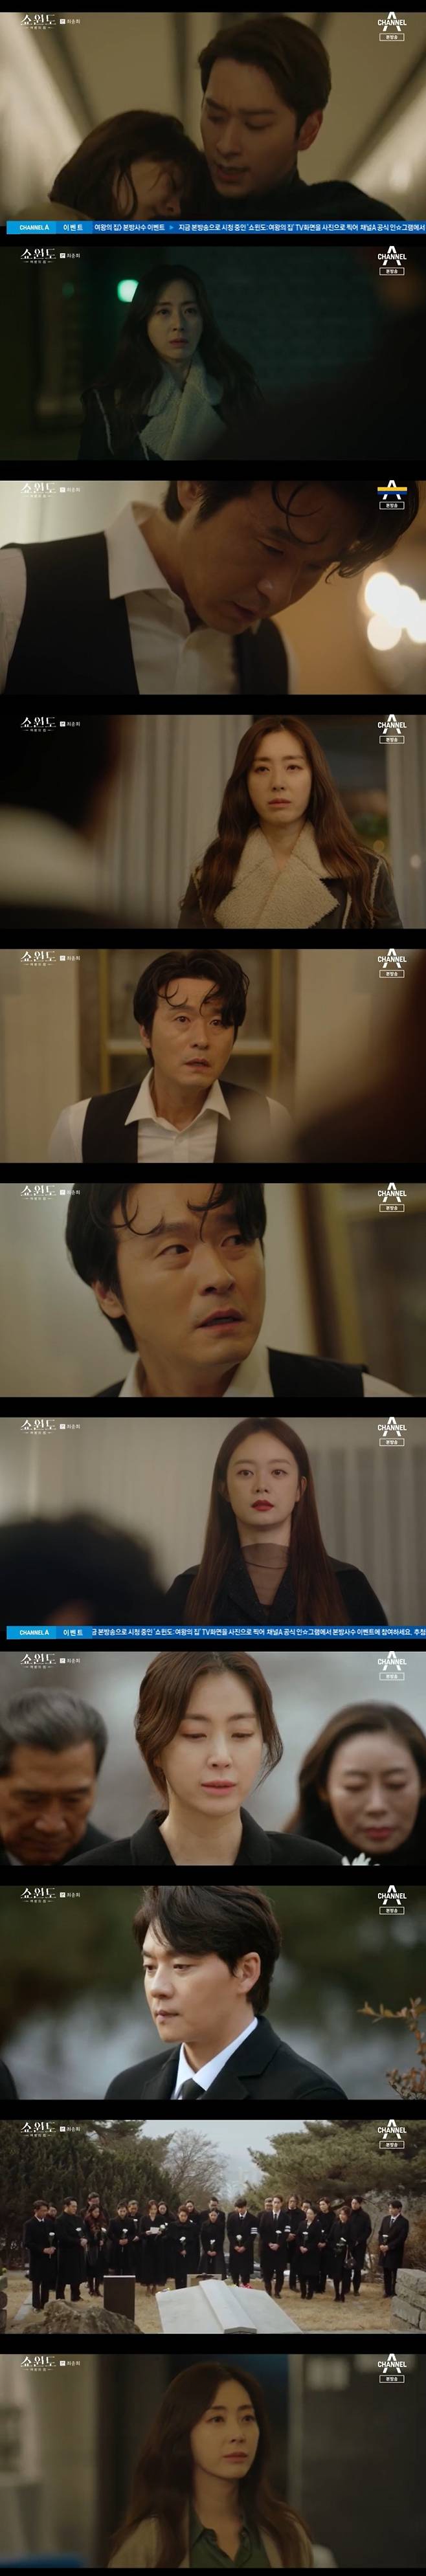 Seoul = = Showwindow Song Yoon-ah and Jeon So-min have finished a bloody revenge play for Lee Sung-jae.In the Channel A monthly drama Showwindow: The Queens House (playplayed by Han Bo-kyung, Park Hye-young/directed by Kangsol and Park Dae-hee), which aired at 10:30 p.m. on the 18th, Yoon Mi-ra (played by Jeon So-min) was imprisoned after stabbing Shin Myung-seop (Lee Sung-jae) to death.Shin Myung-seop had a situation like he made an extreme choice alone after he had killed Yoon Mi-ra.But Han Jung-won (professor) came to Yoon Mi-ras house and rescued him from his slump in the bathtub.Shin tried to remove Han Jung-won, but was betrayed by his party.Han Jung-wons sister, Han Sun-joo, said she would give three times the amount offered by Shin Myung-seop.Han Seon-joo asked Shin Myung-seop, who was kidnapped, Why did you betray me? When Shin Myung-seop blamed Yoon Mi-ra until the end, Han Sun-joo said, It is mean and lethal to the end.So you killed Yoon Mi-ra, he shot back.At that moment, Yoon Mi-ra, who thought he was dead, appeared and Shin Myung-seop was stunned.Yoon Mi-ra said, I do not think I will forget the eyes that were cold when you stabbed me with this knife. Then stabbed Shin Myung-seop to death.Yoon Mi-ra, under a police investigation, said, The person I was trying to kill was not Shin Myung-seop, but Han Seon-ju.I didnt expect that, he falsely confessed.Detectives arrested Yoon Mi-ra for killing Shin Myung-seop, who tried to hire a lawyer for Yoon Mi-ra, but Yoon Mi-ra refused.Yoon Mi-ra told Han Sun-joo, who came to visit, I am so pathetic that I have broken my sisters family and hurt her. I have to be punished.I hope I keep my last salty teeth, he said.On the other hand, Channel A Showwindow: The Queens House is a mystery melodrama that depicts a woman who did not know she was her husbands woman and cheered for an affair.